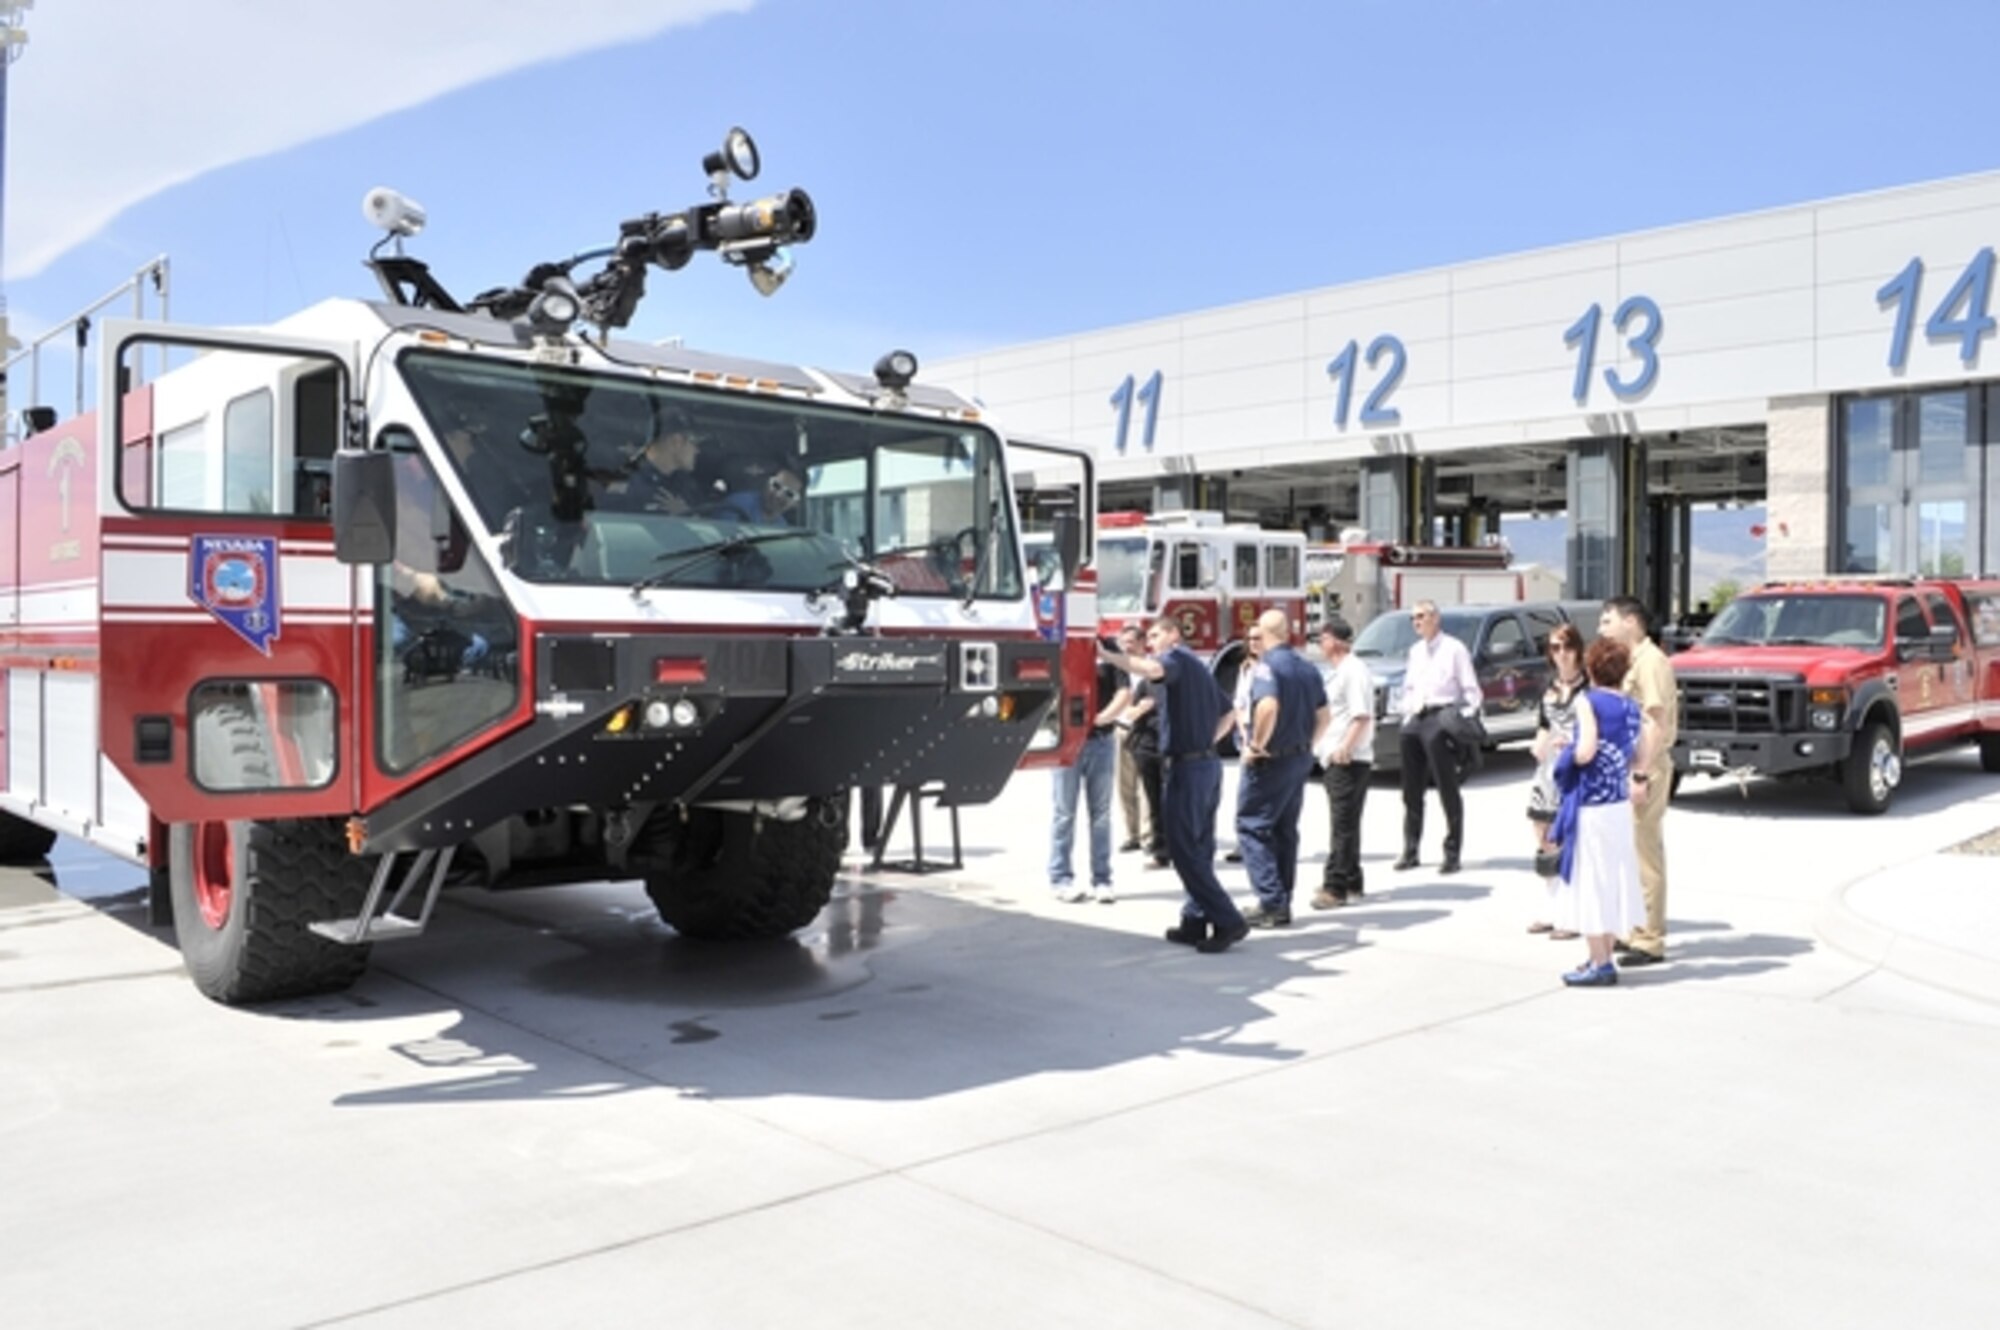 Representatives from various organizations view firefighting equipment at the Nevada Air Guard base in Reno on May 15 during the 2013 Nevada ESGR Employer Recognition Event. The event recognized the extraordinary reserve-component military support of more than 40 Nevada public and private organizations.  NV ANG Photo by Senior Airman Ashif Halim (released).